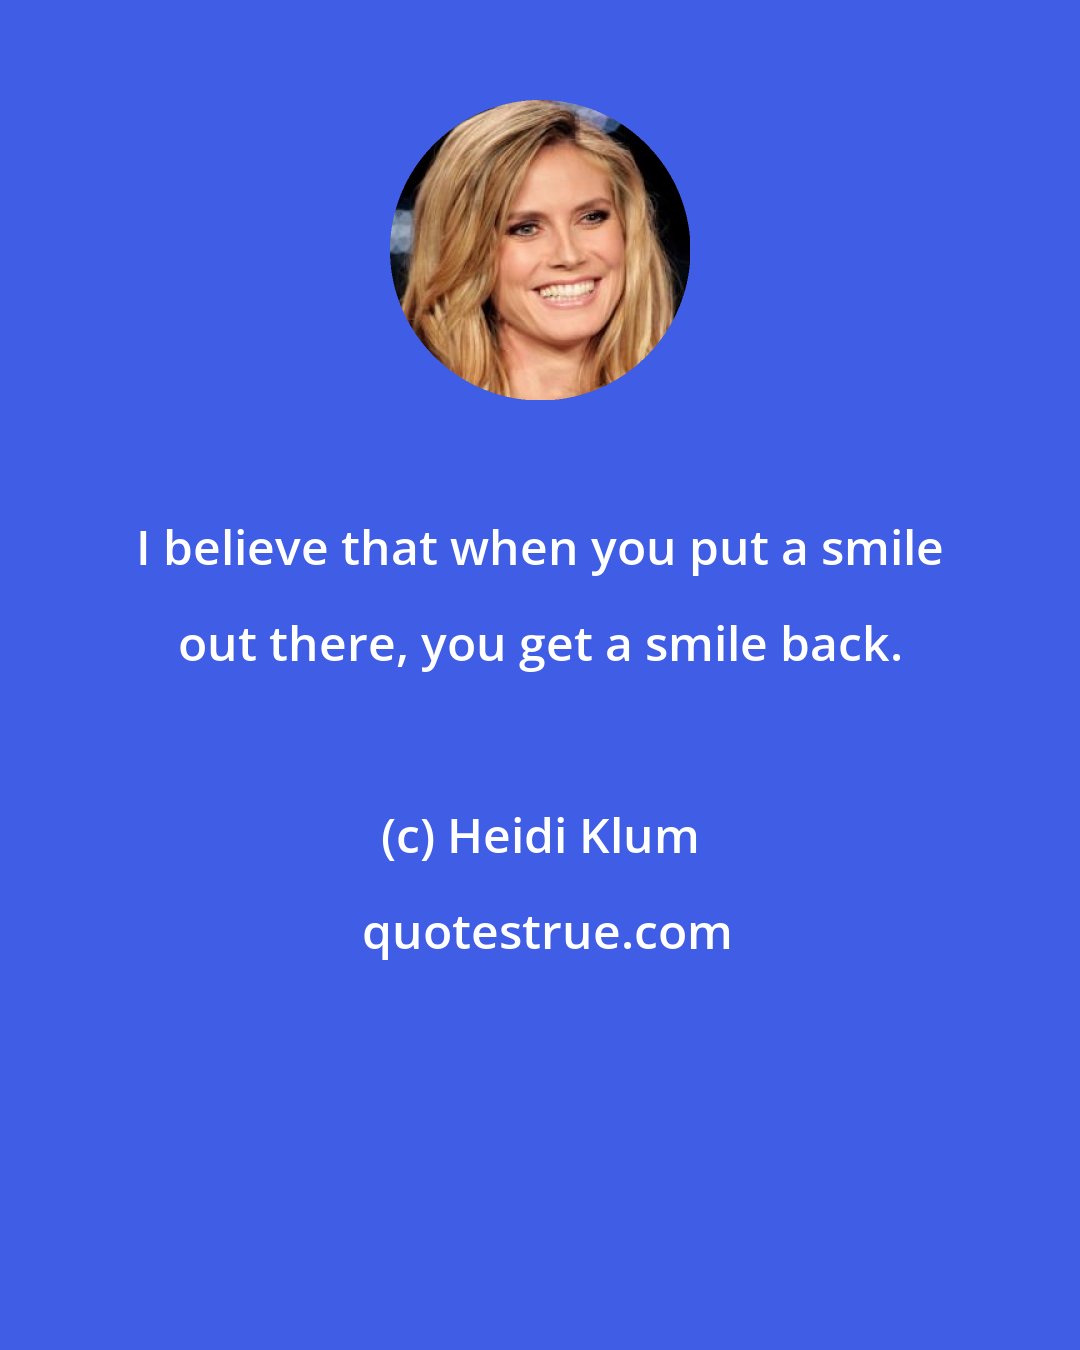 Heidi Klum: I believe that when you put a smile out there, you get a smile back.